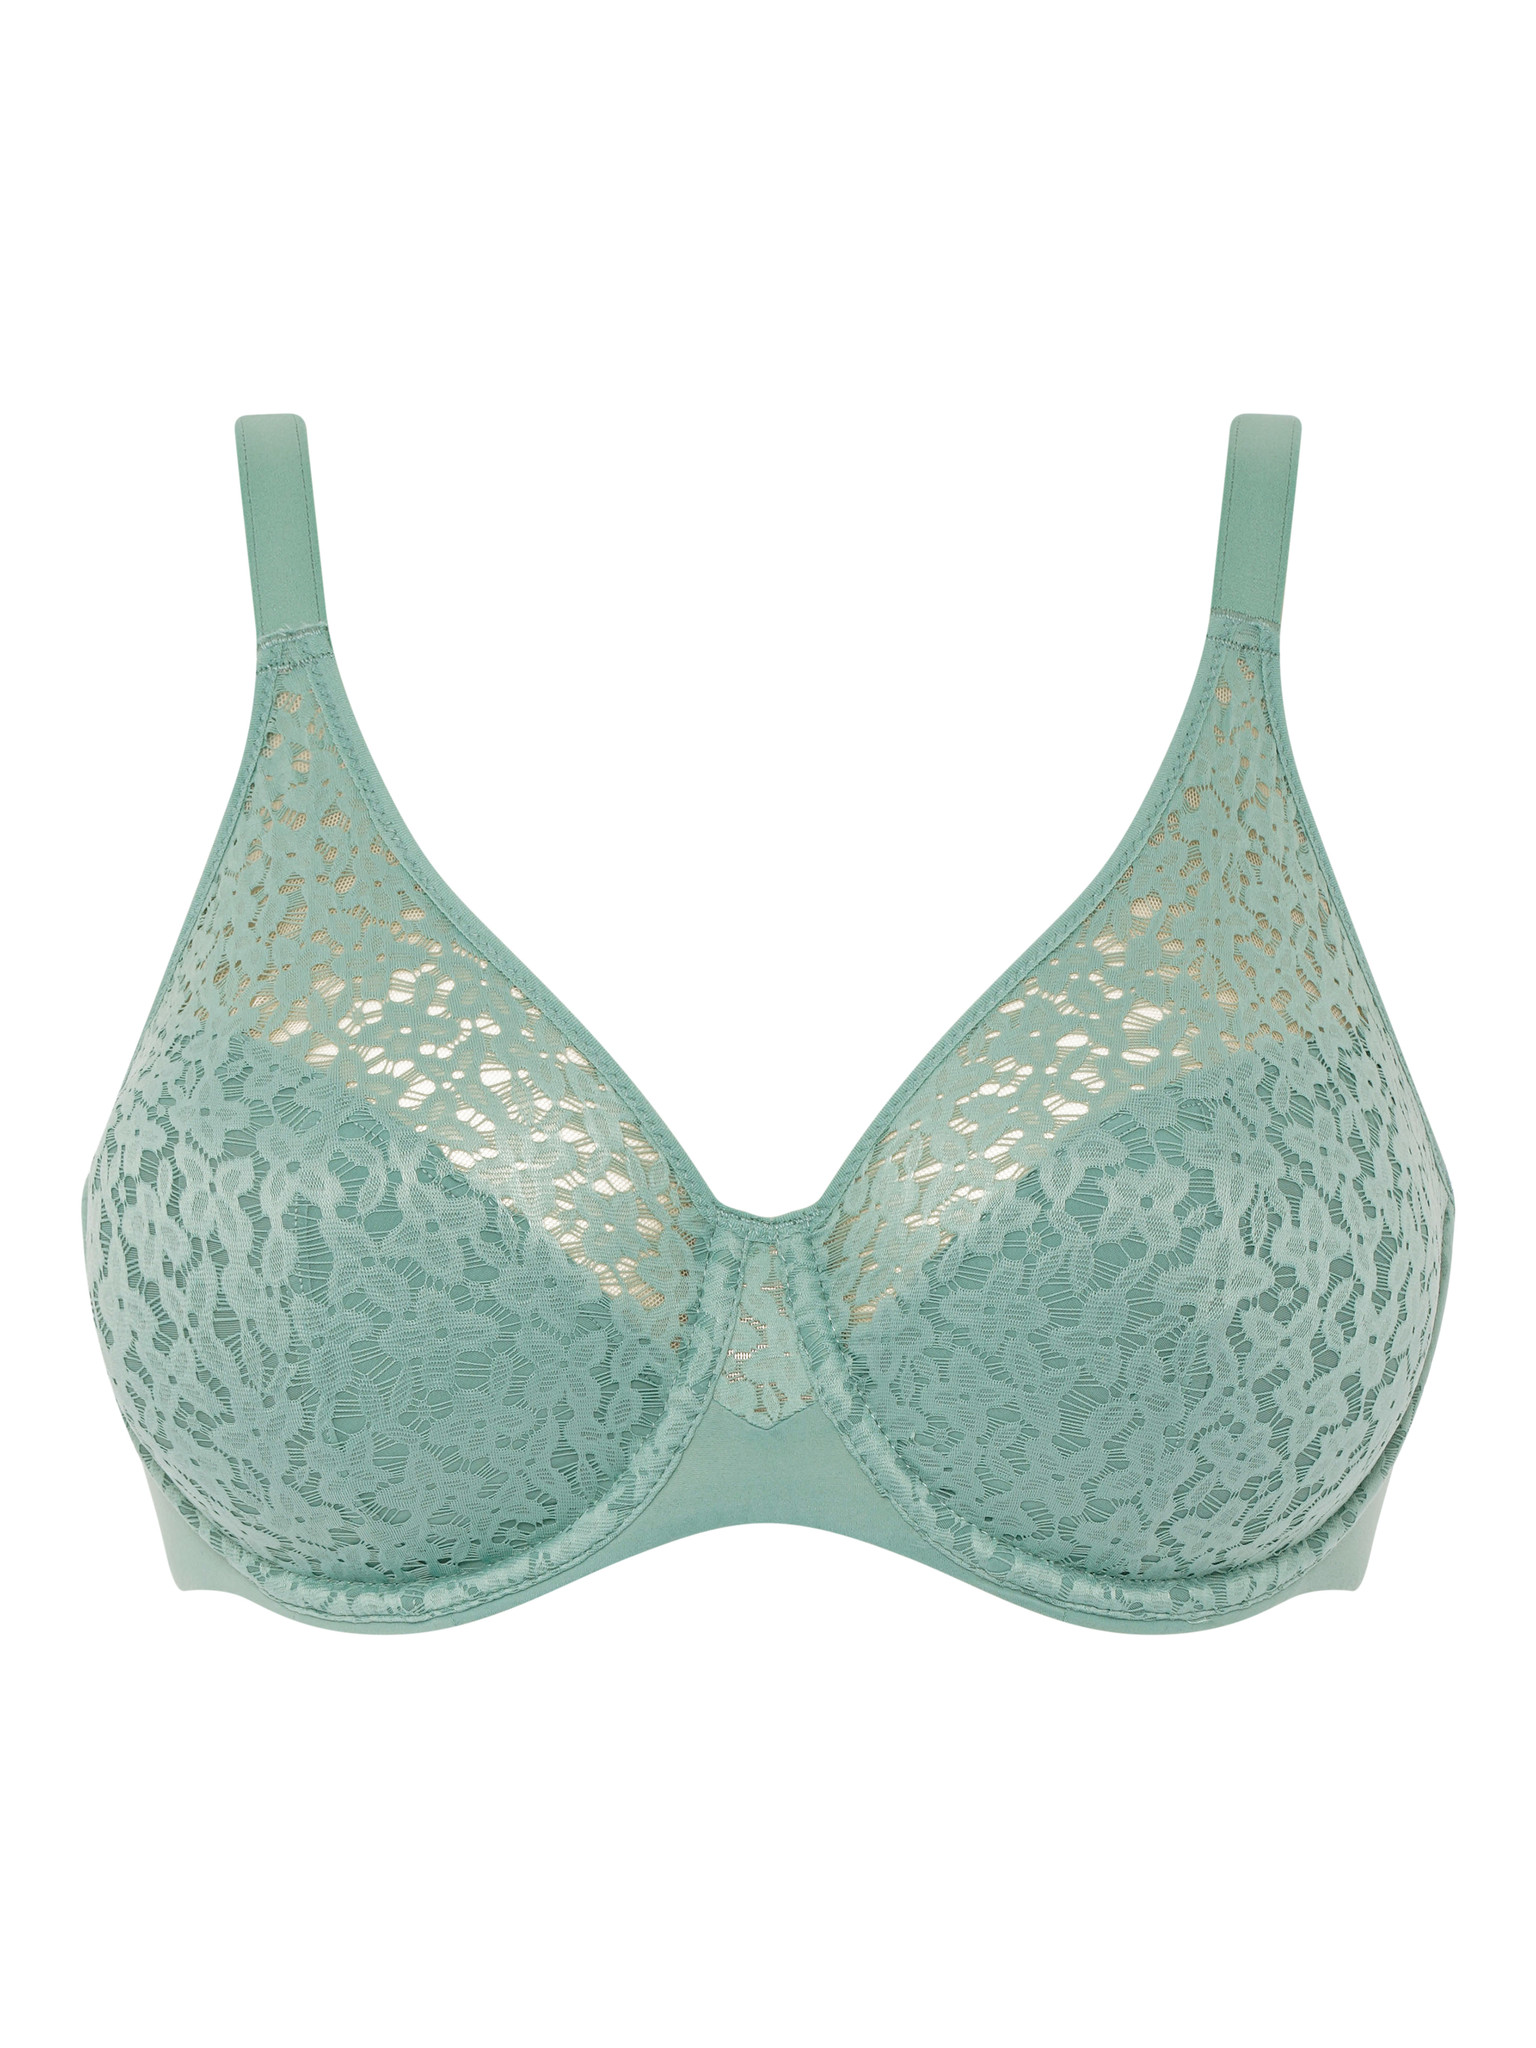 Norah Molded Bra 13F1 Laurel Green (84) - Lace & Day